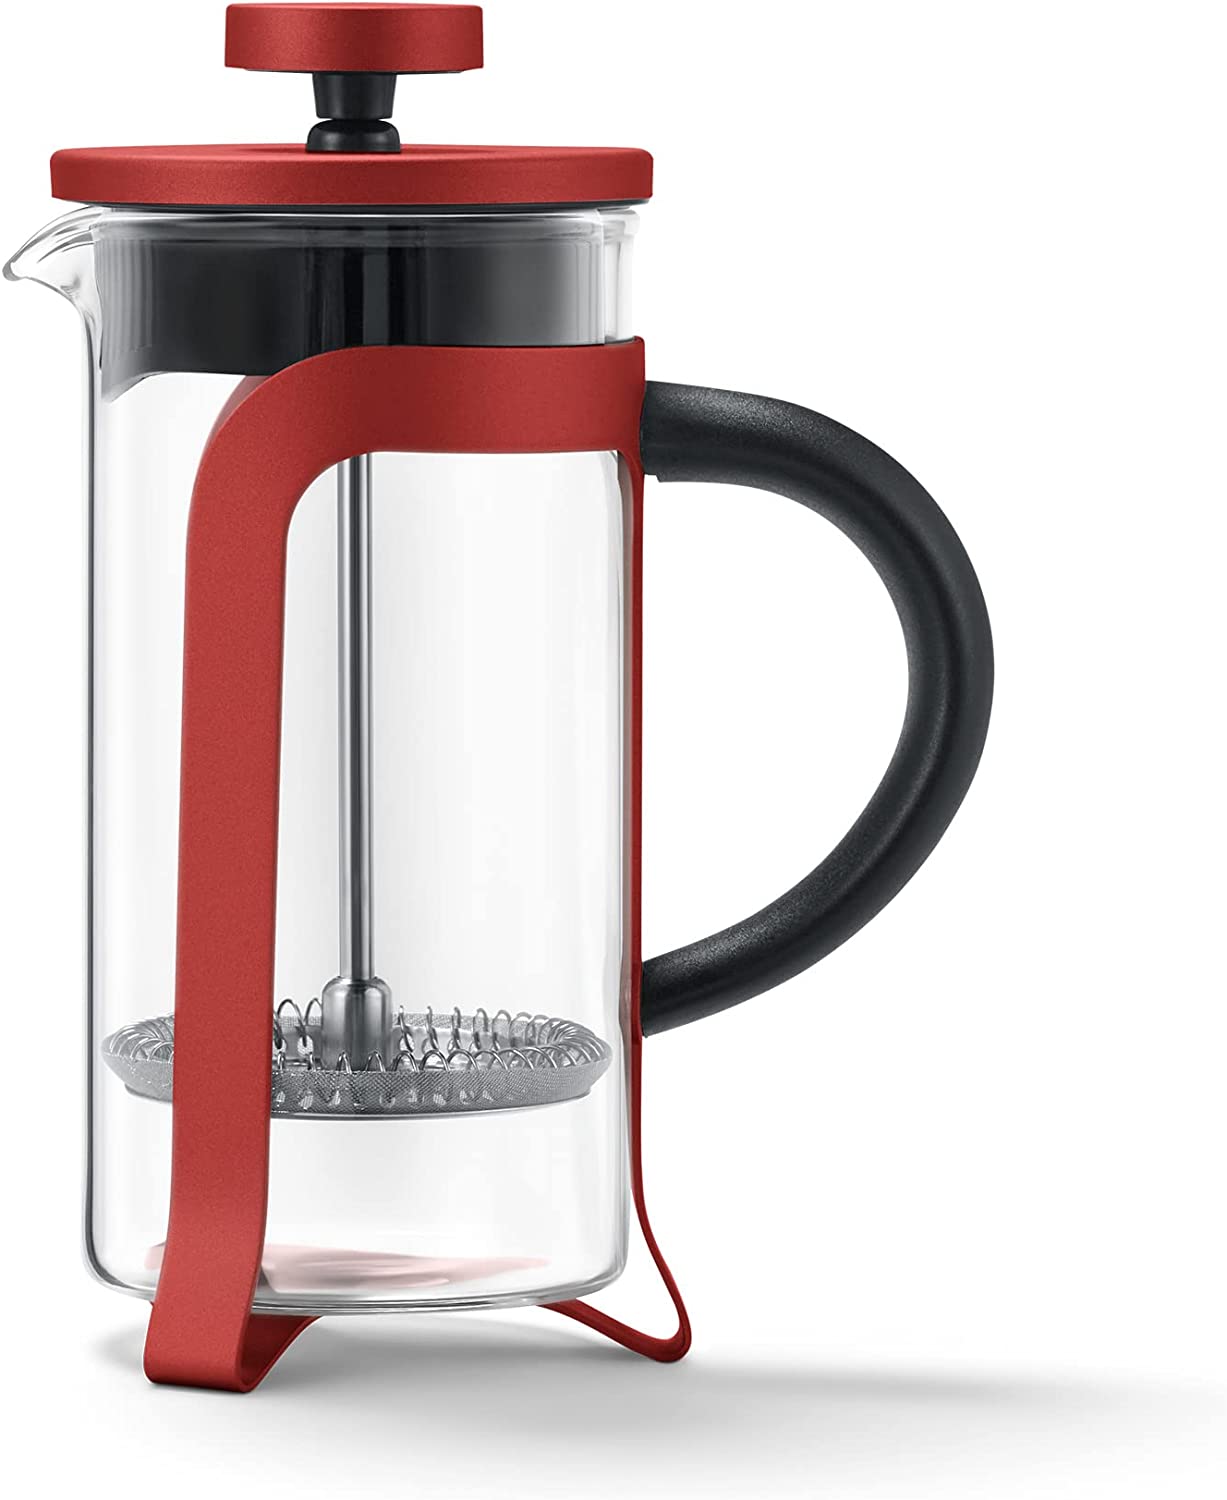 Tchibo Strainer Stamp Jug for Manual Coffee Preparation, French Press with Heat Heat resistant Borosilicate Glass, Dishwasher Safe, 300 ml capacity for Approx. 2 cups, Stainless Steel, Red